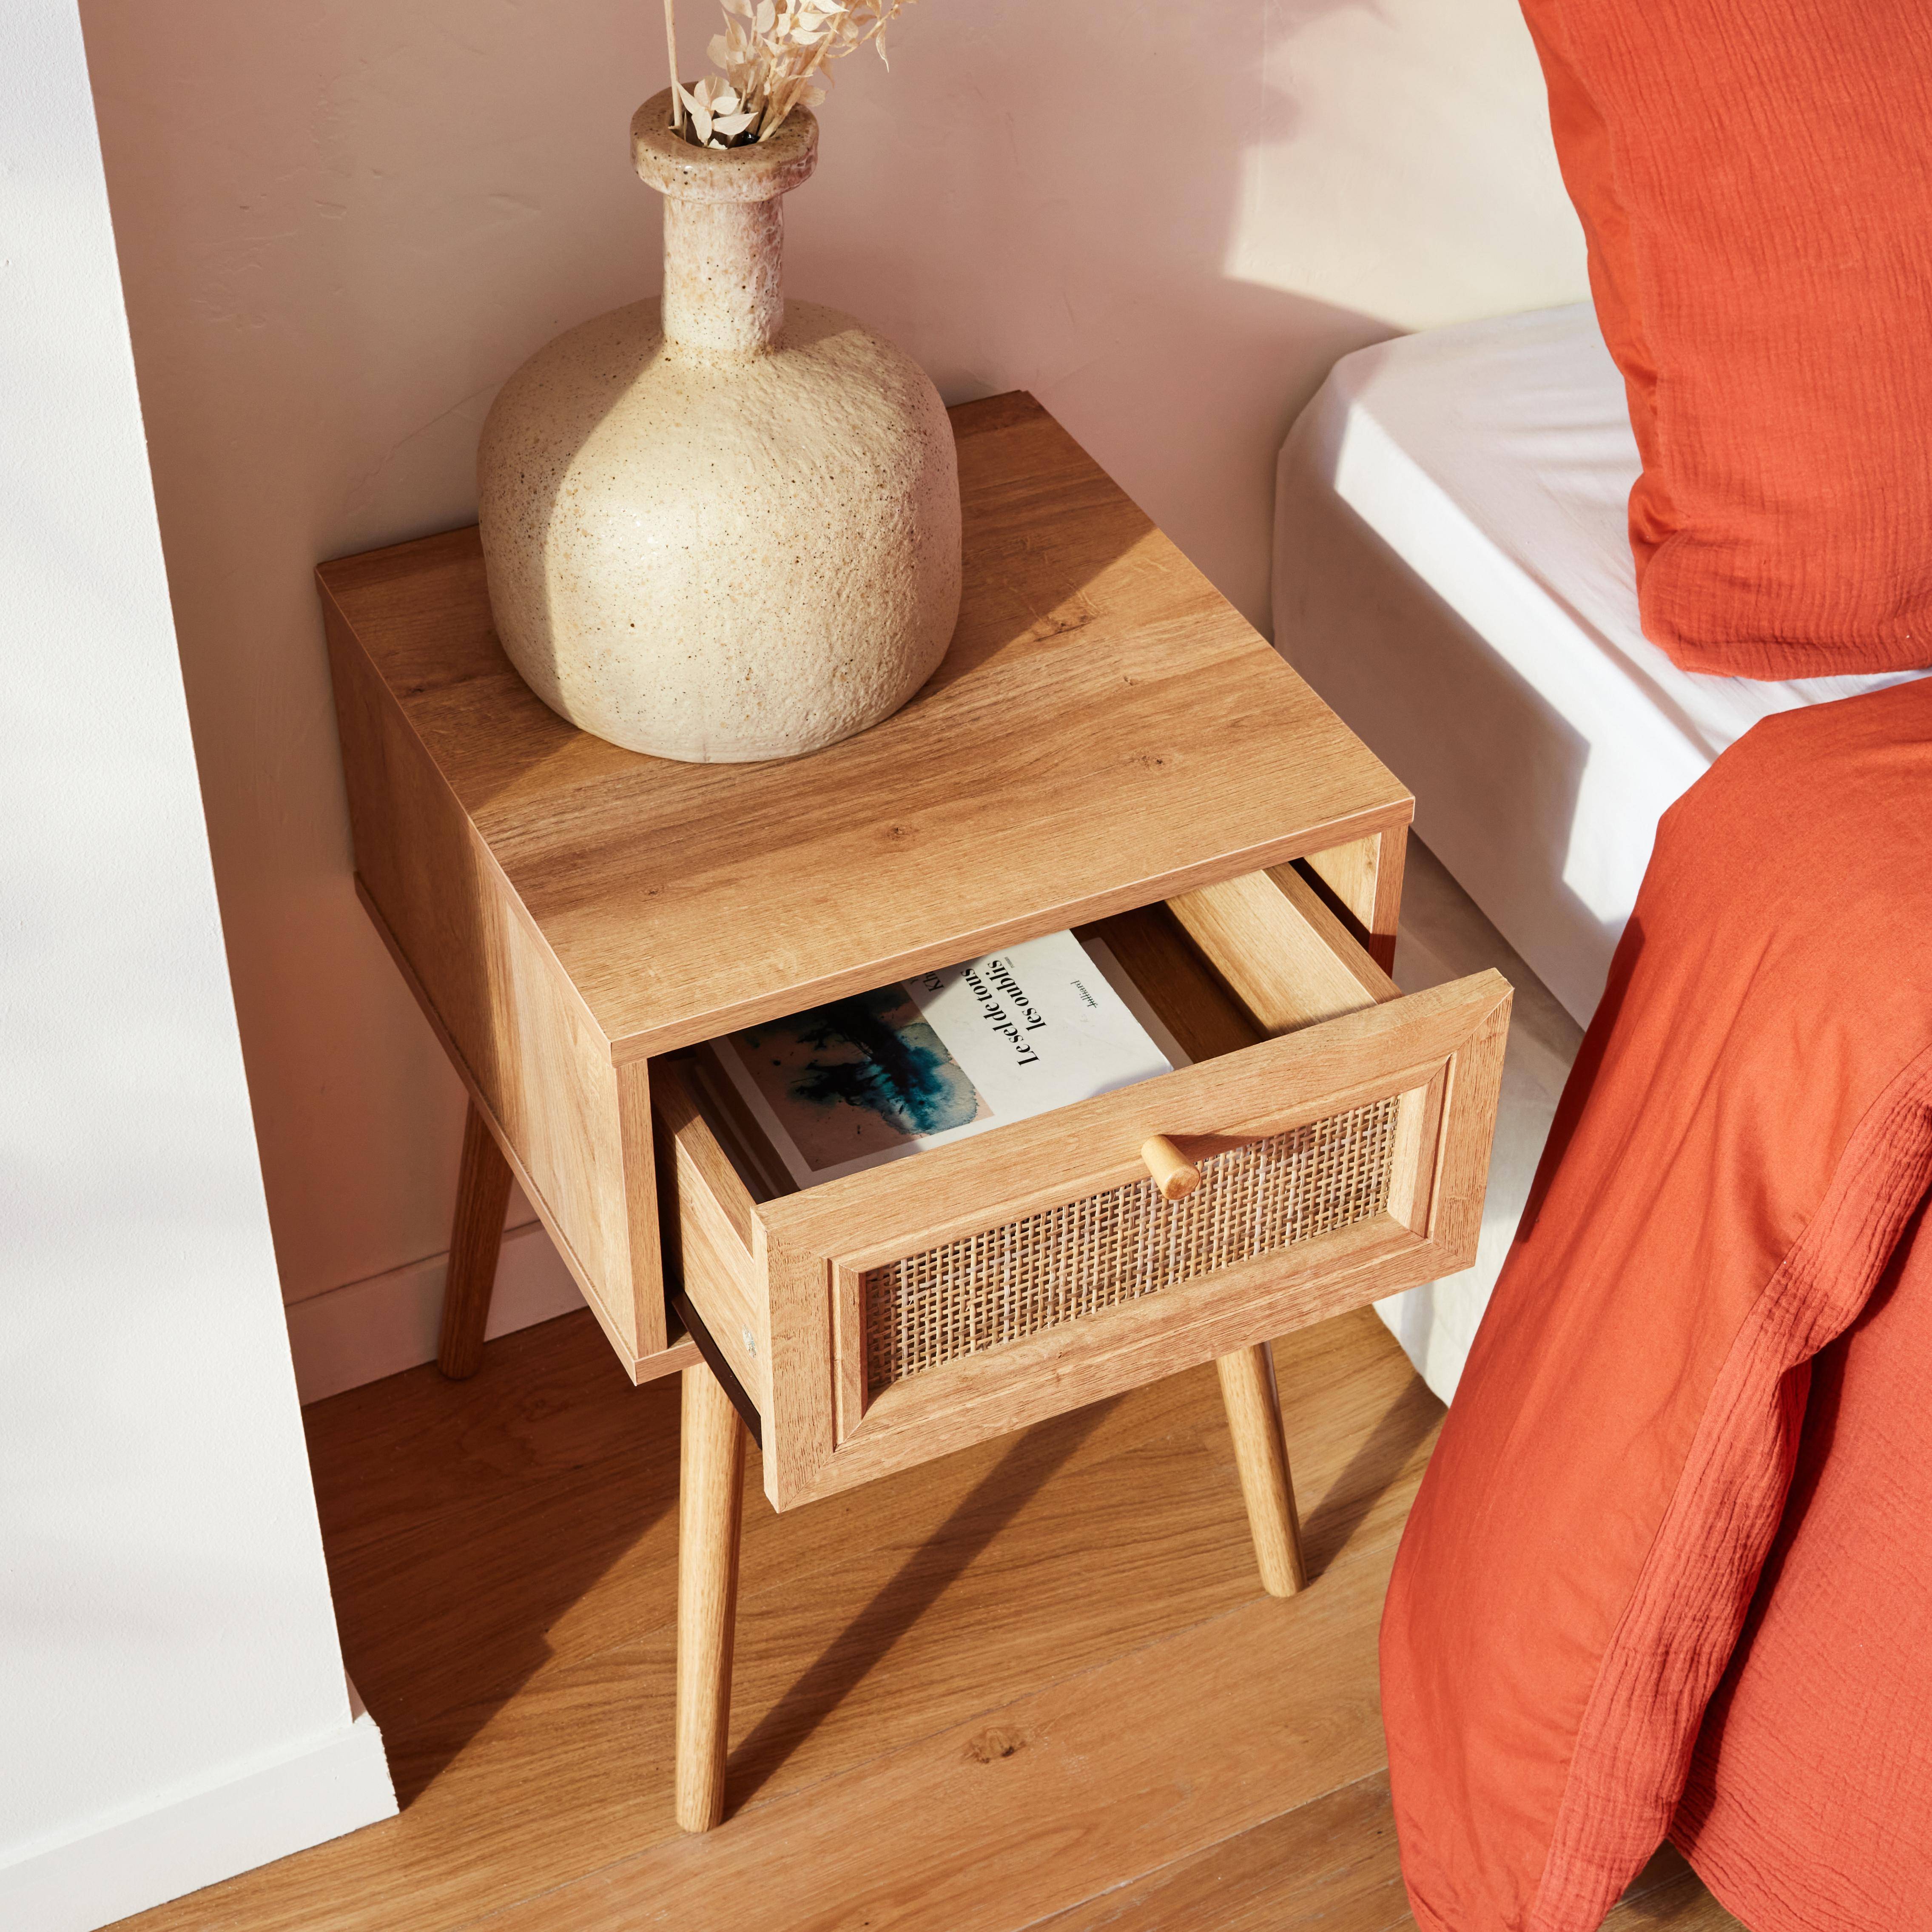 Woven rattan bedside table with drawer, 39x39x55.4cm - Boheme - Natural Wood colour Photo2